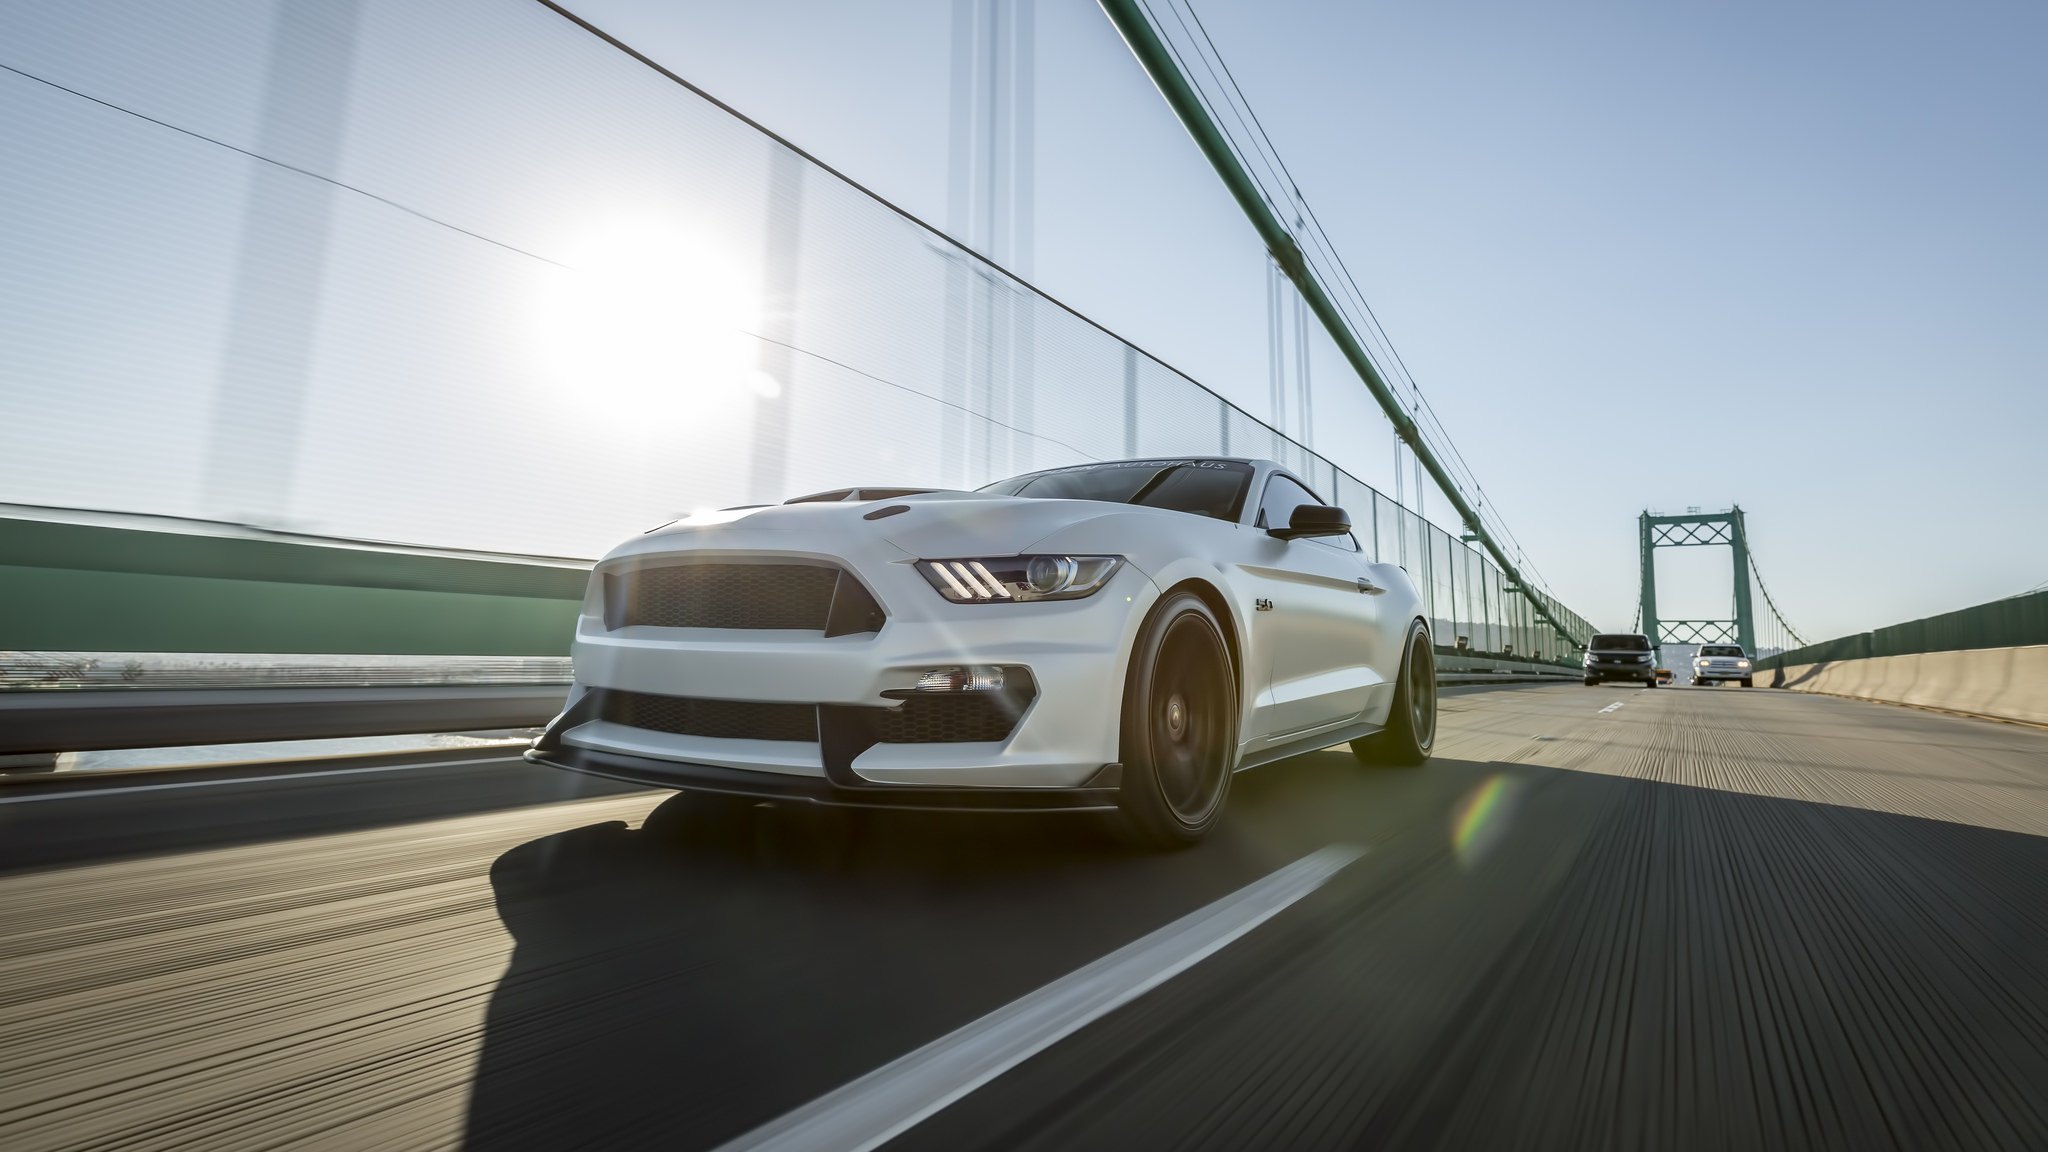 Custom Front Bumper Lip Spoiler on White Ford Mustang  - Photo by Boden Autohaus